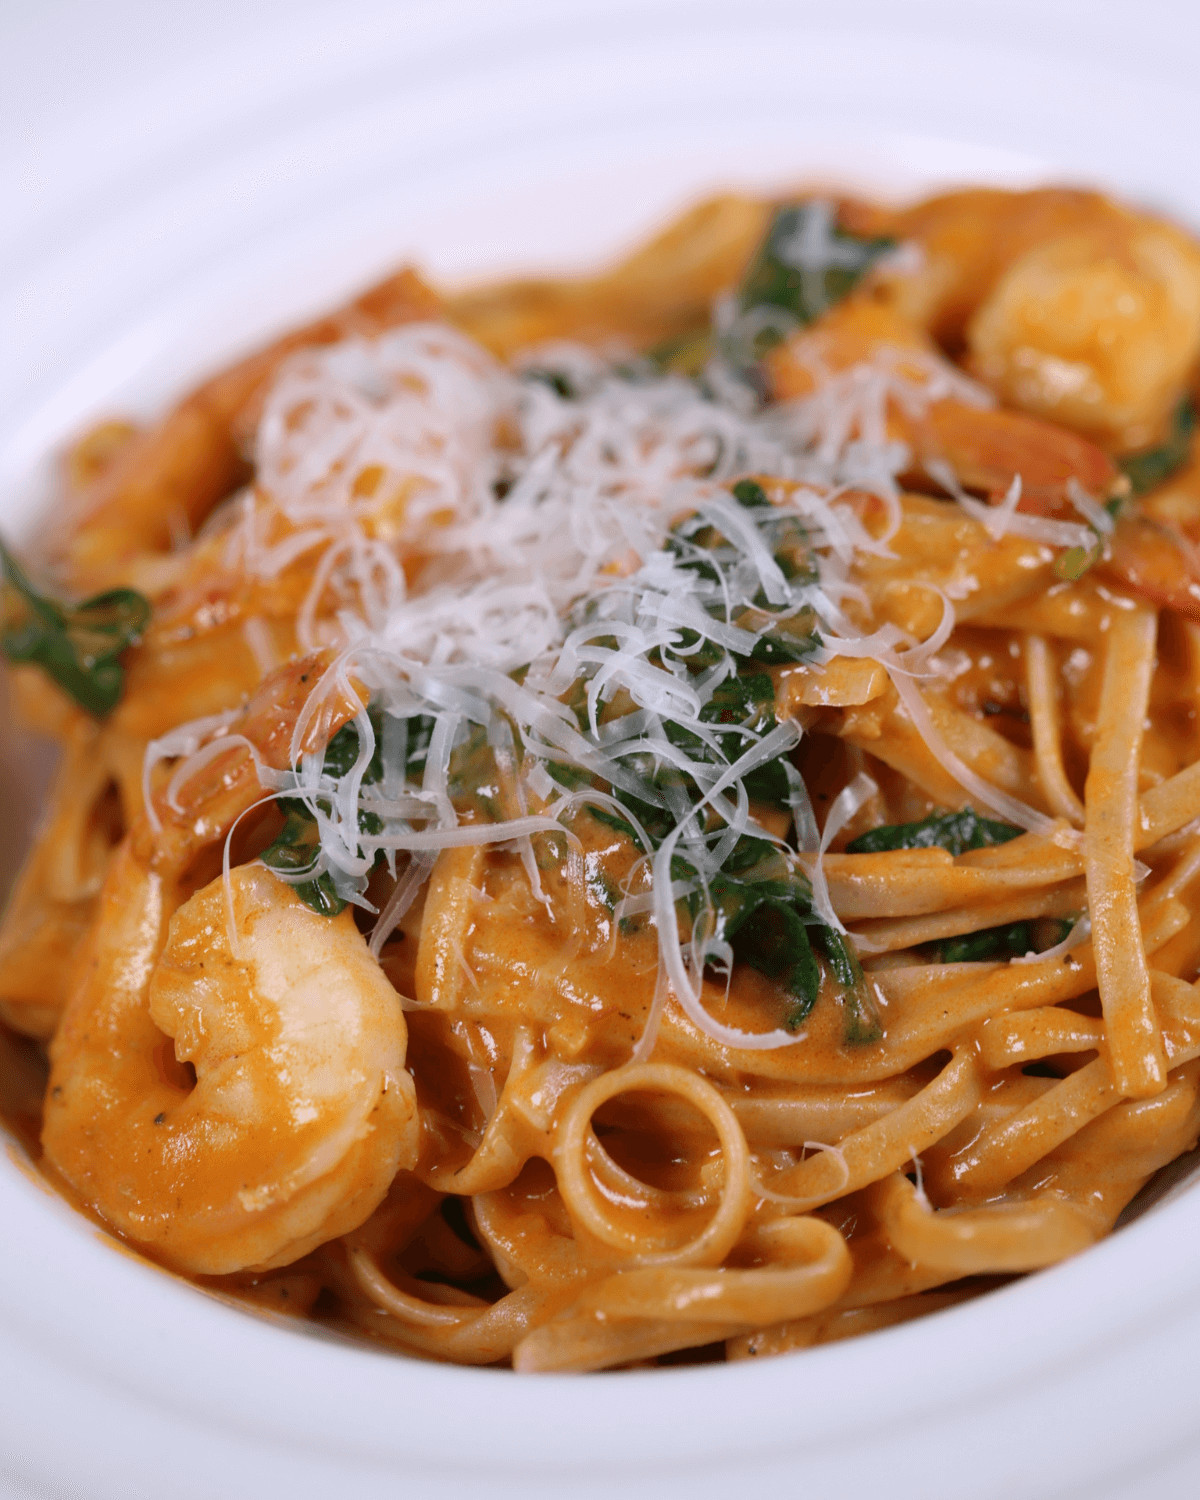 A bowl of Tuscan shrimp pasta, garnished with grated cheese and herbs.